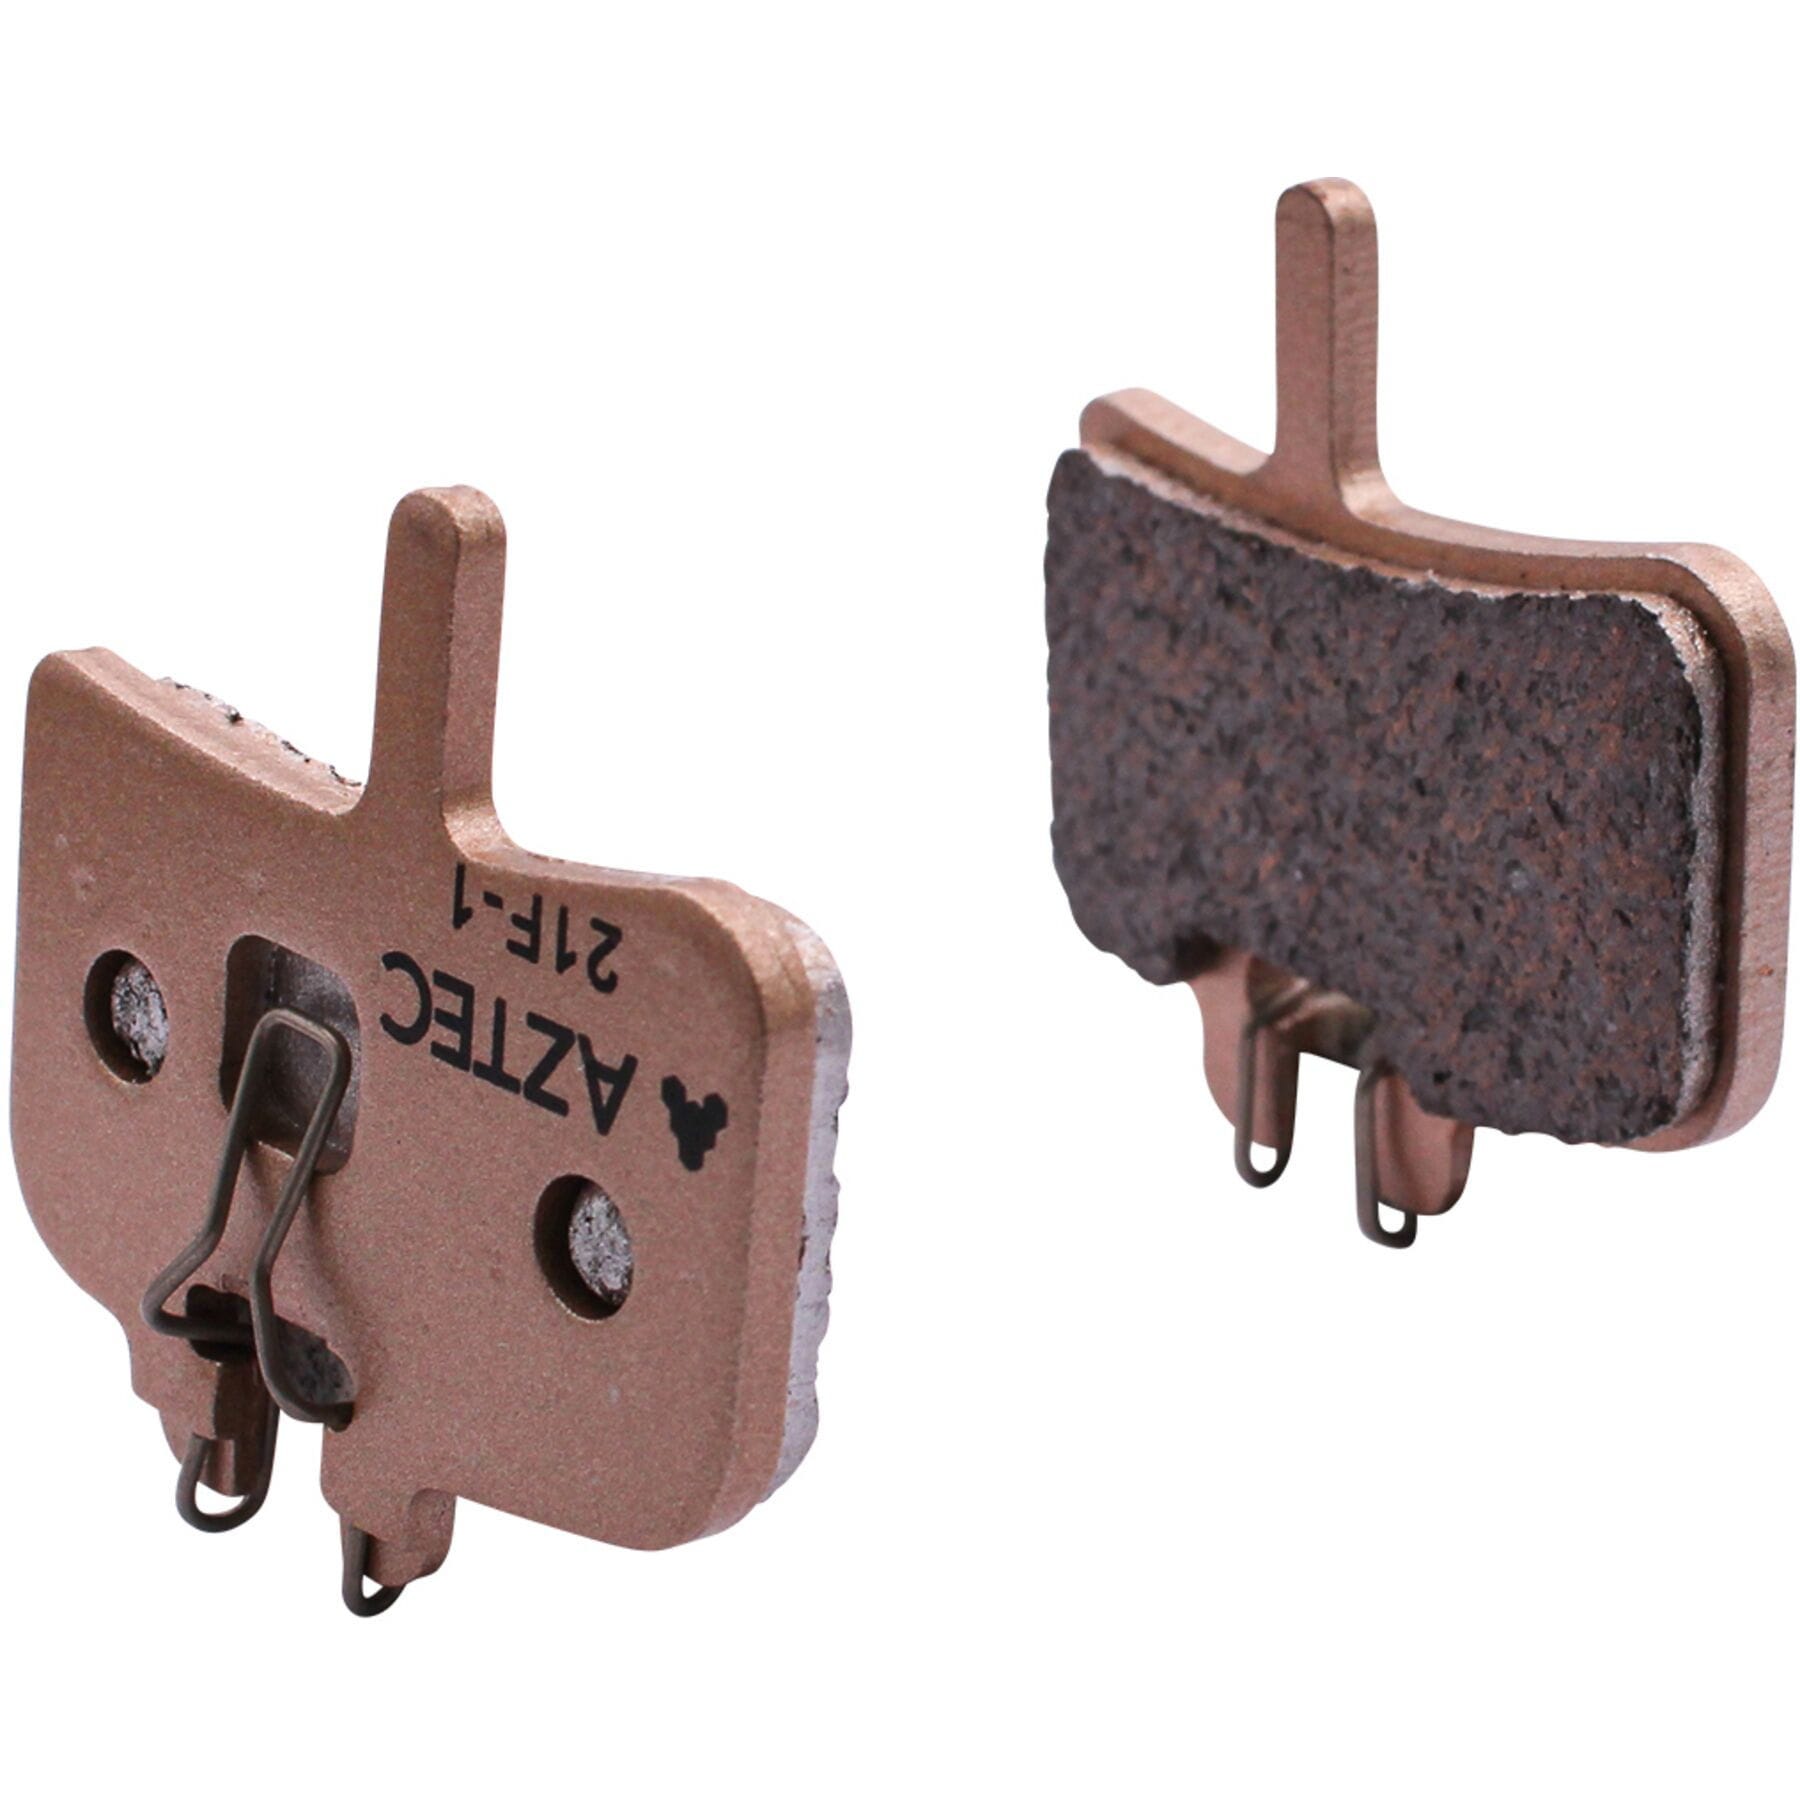 Aztec Sintered disc brake pads for Hayes and Promax callipers